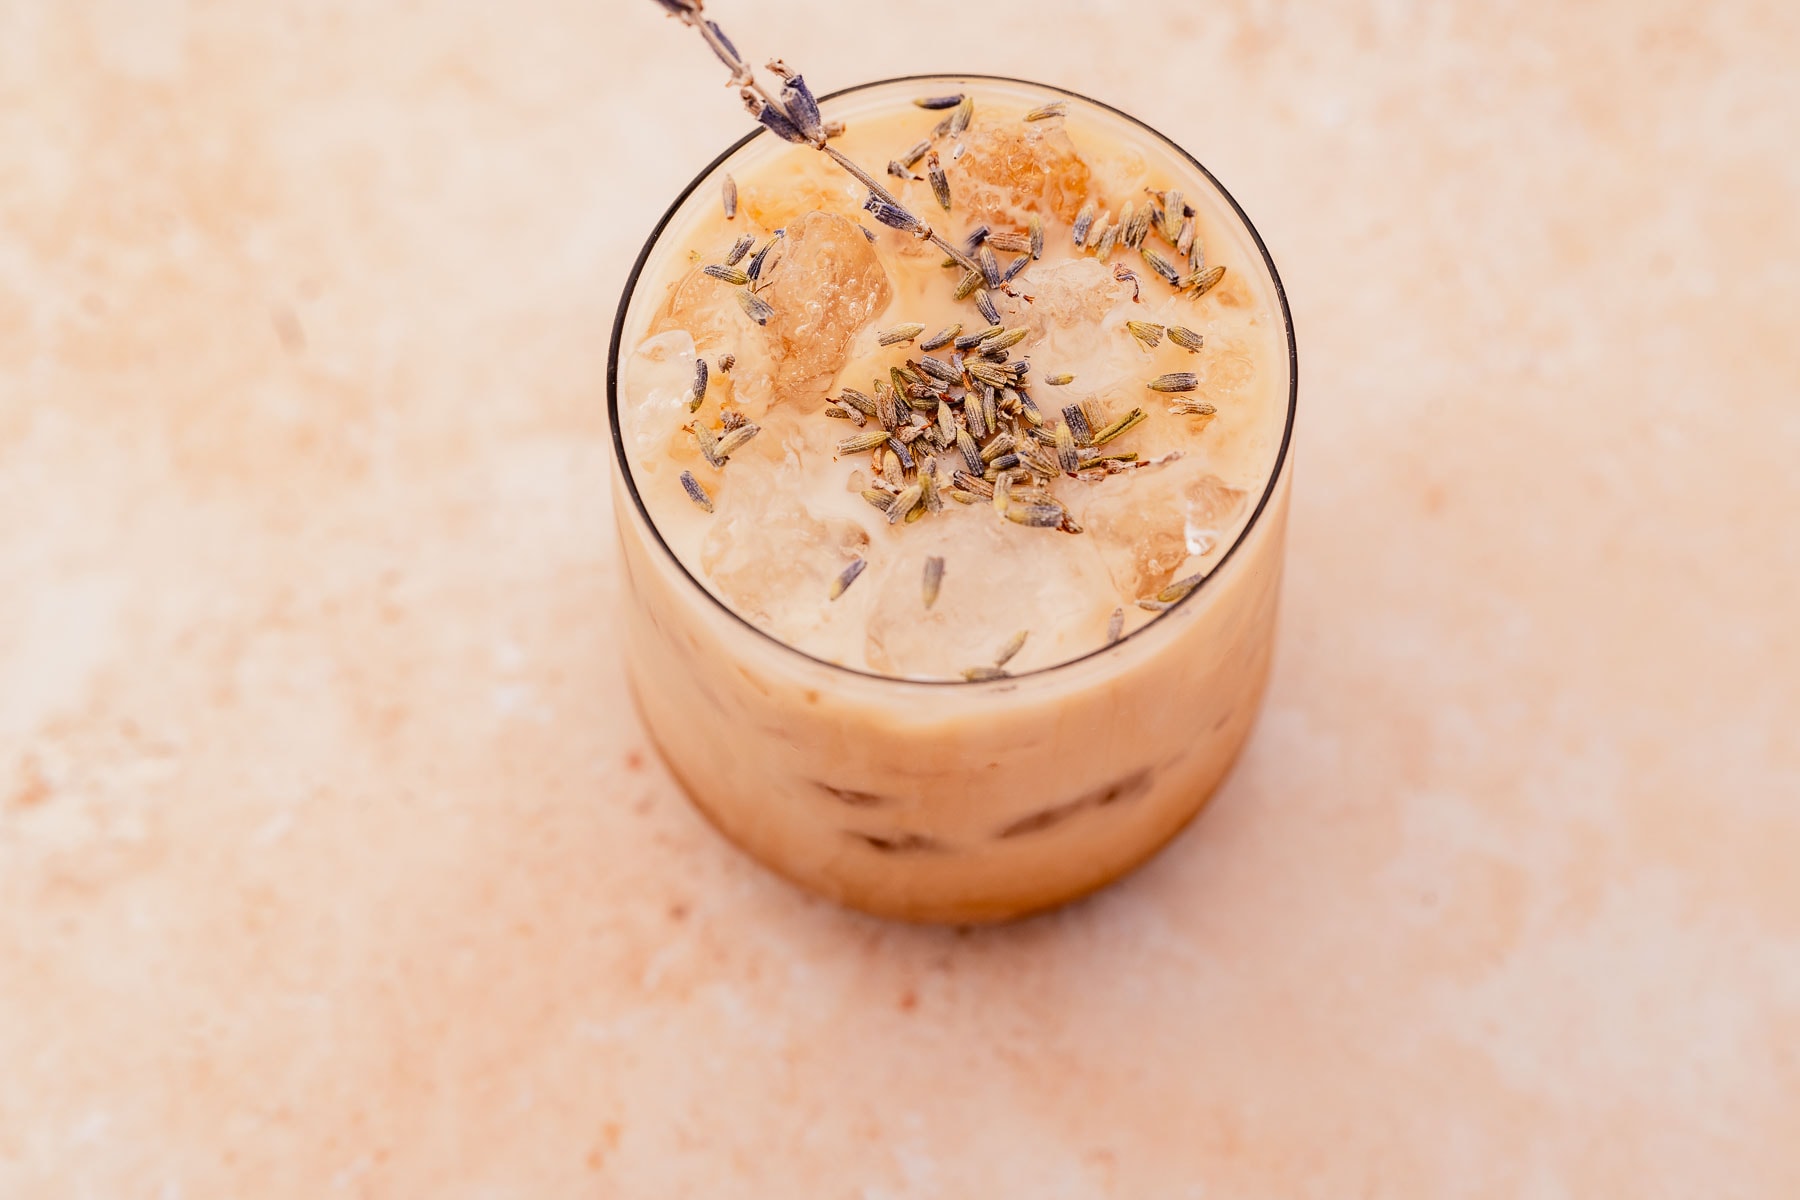 Iced lavender oatmilk latte garnished with lavender on a light-colored surface.